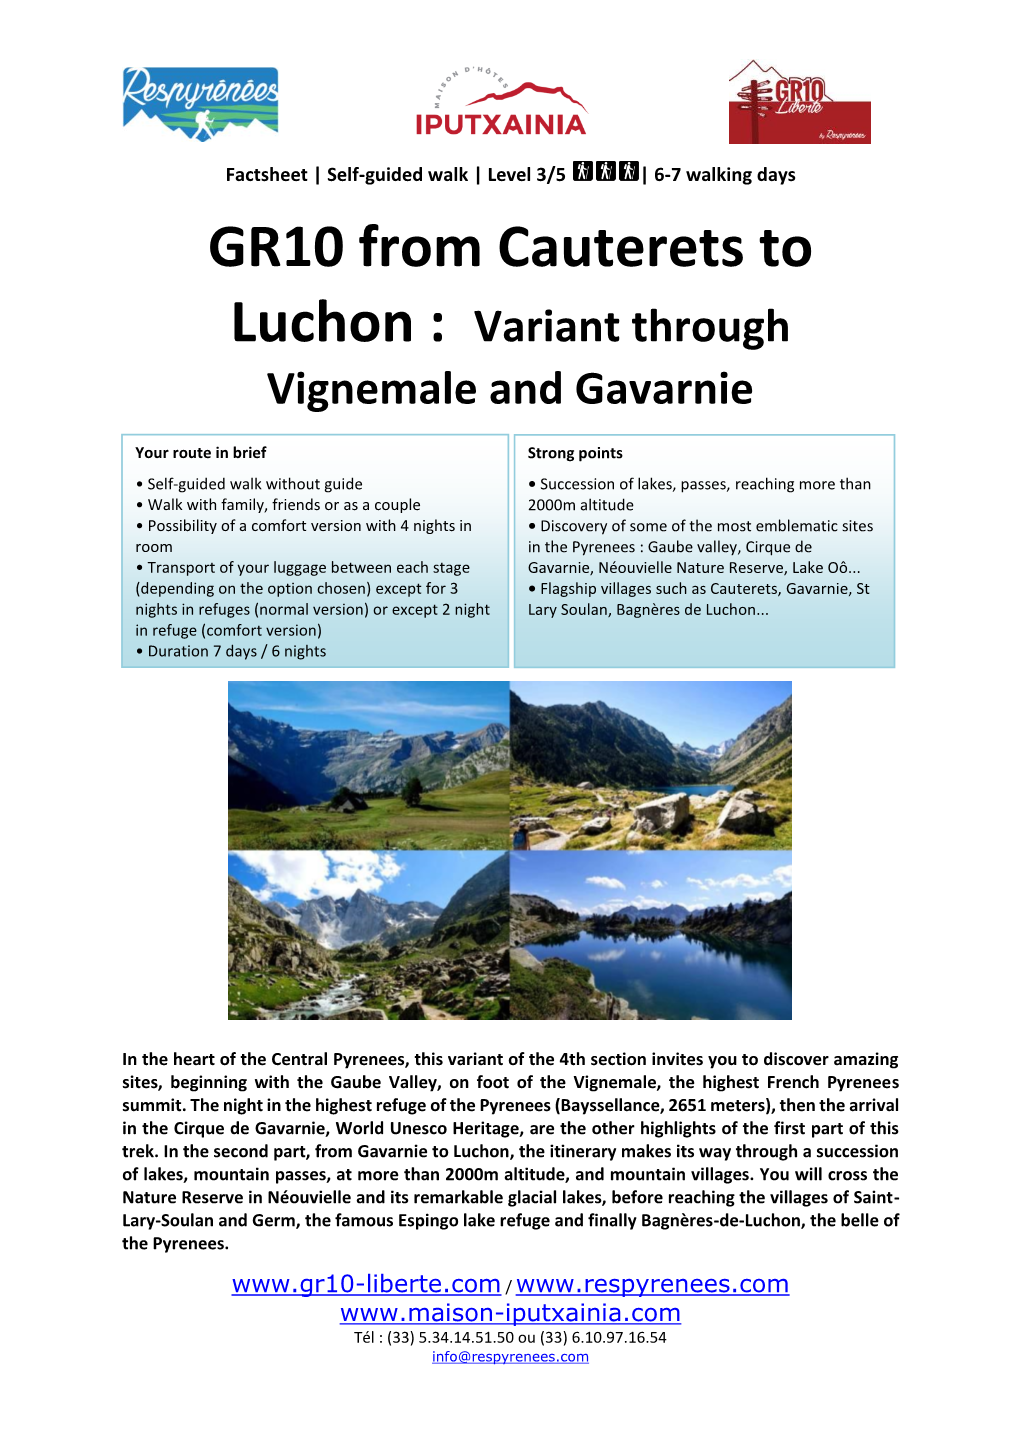 GR10 from Cauterets to Luchon : Variant Through Vignemale and Gavarnie